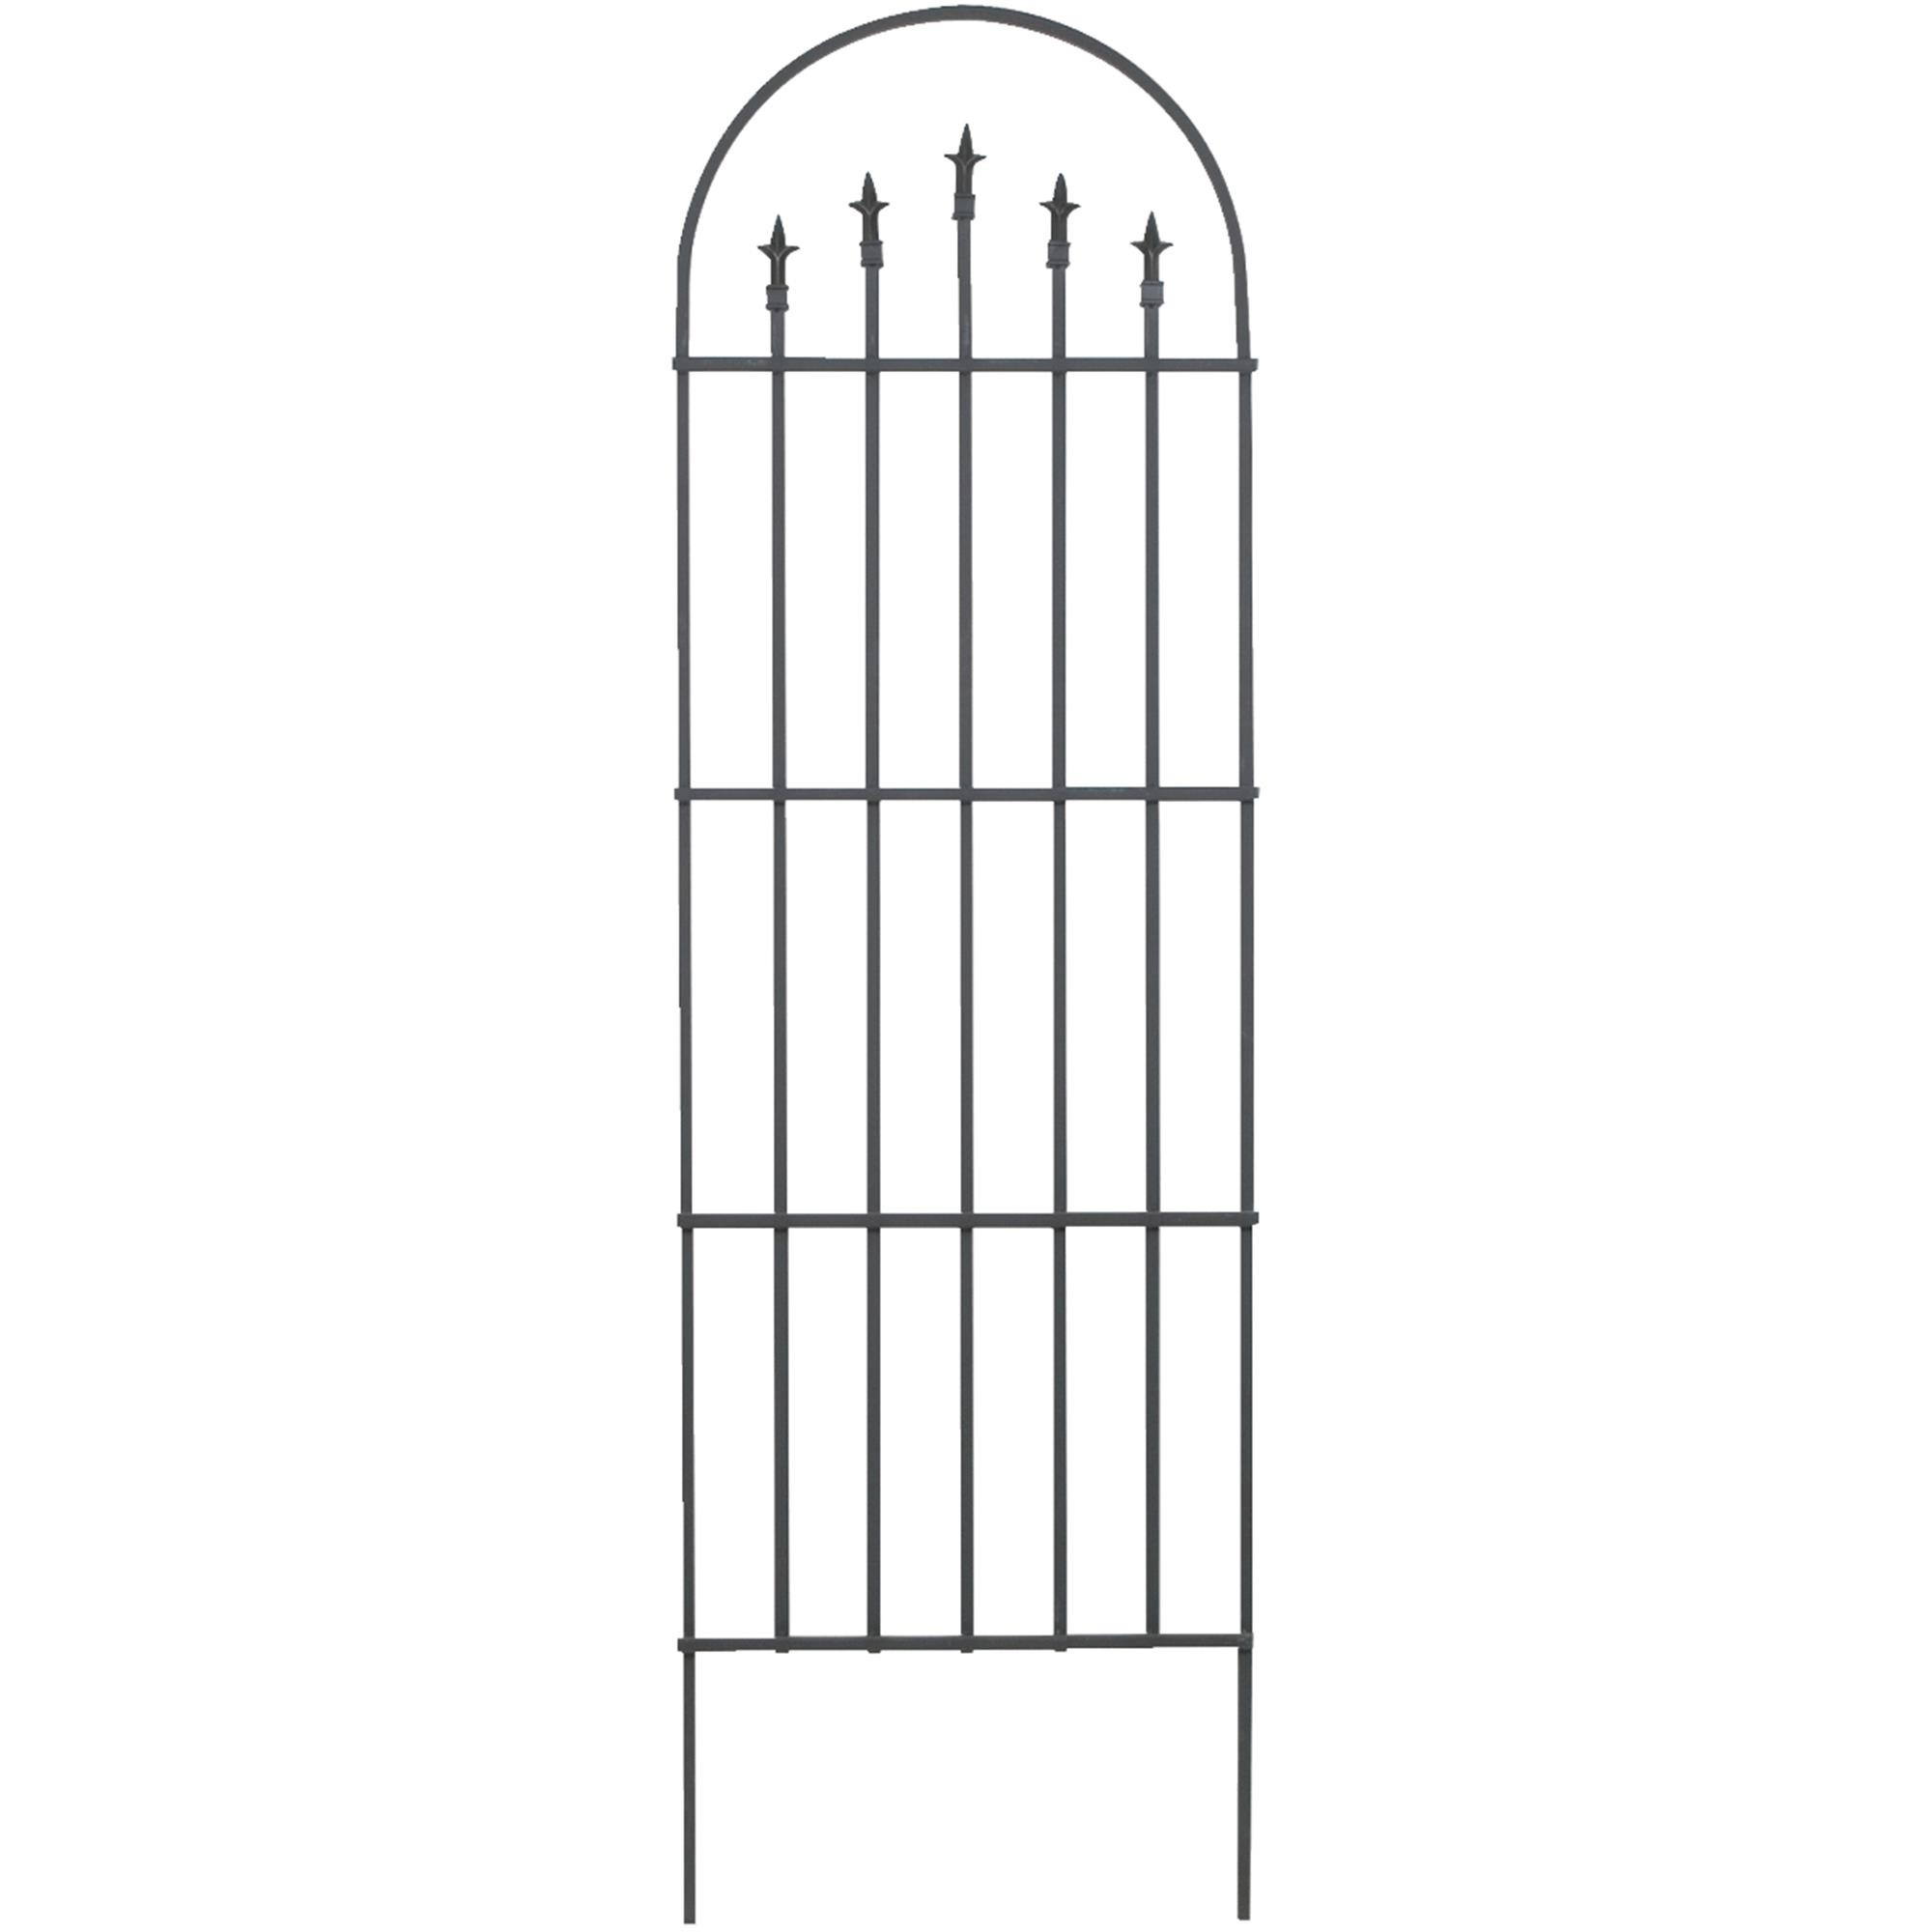 Panacea French Arch Trellis with Finials, Black., 80"H, Pack of 5